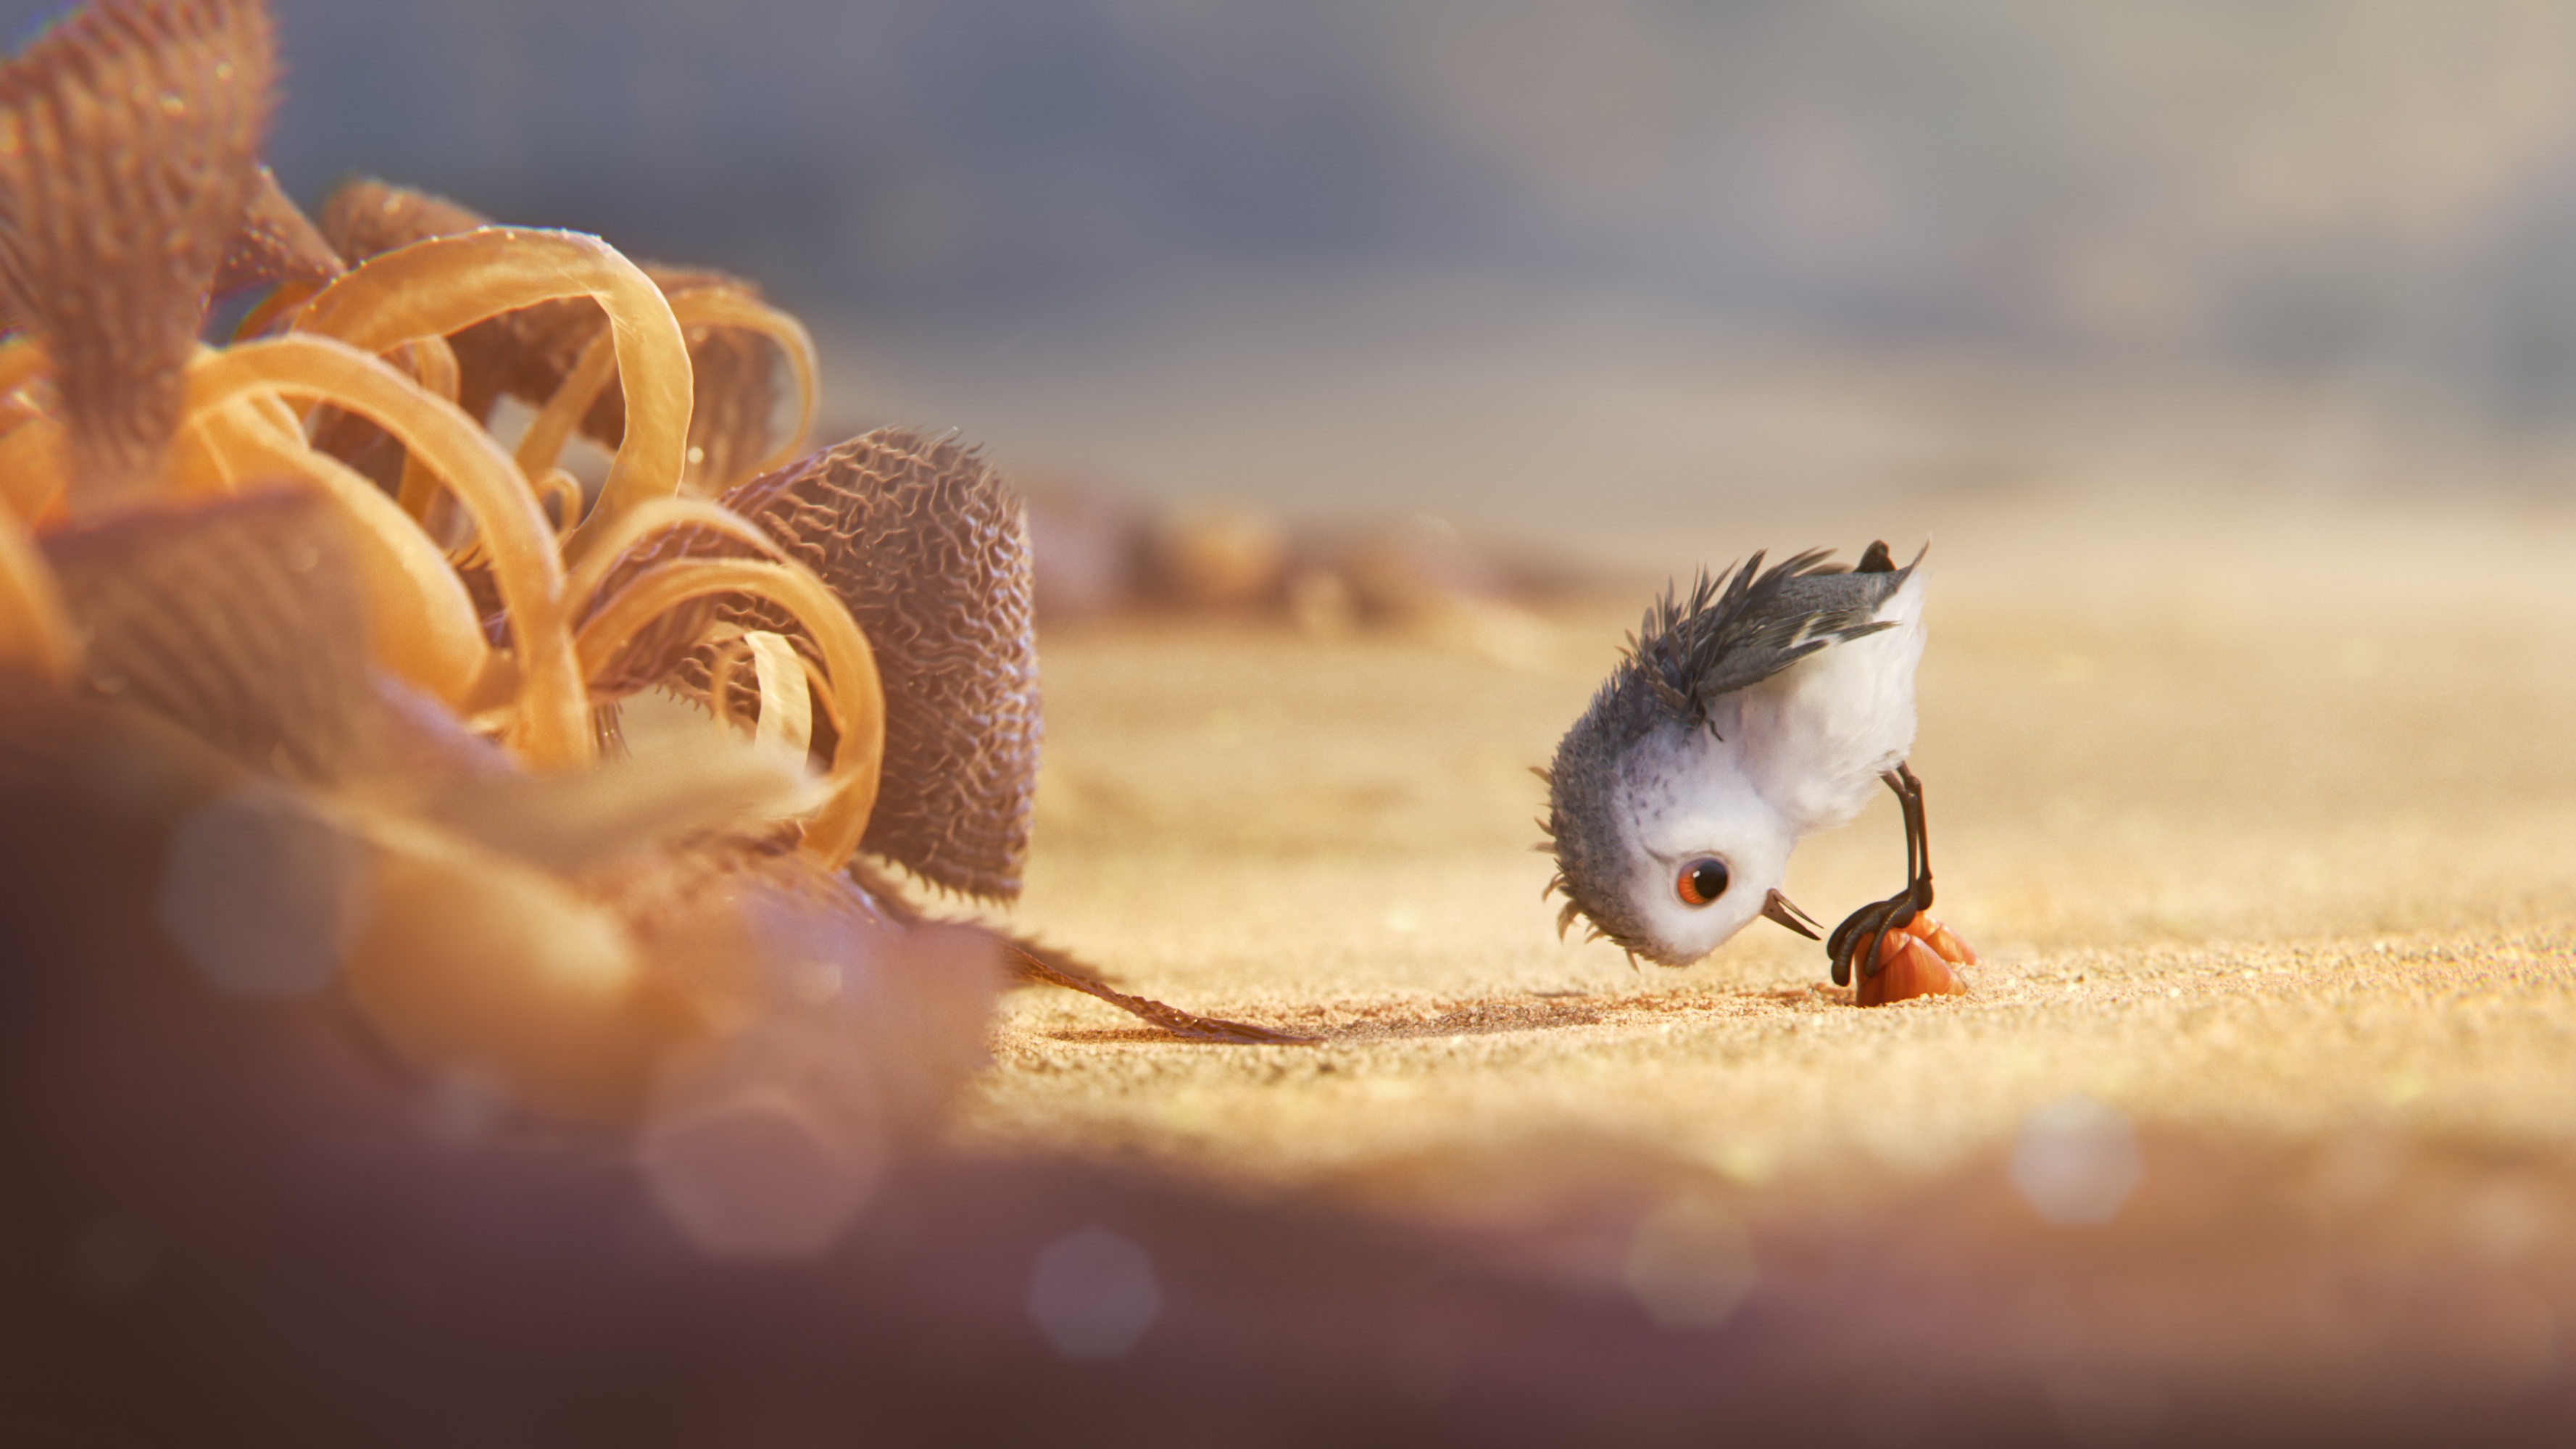 Hungry Baby Sandpiper In Piper 2016 Wallpaper